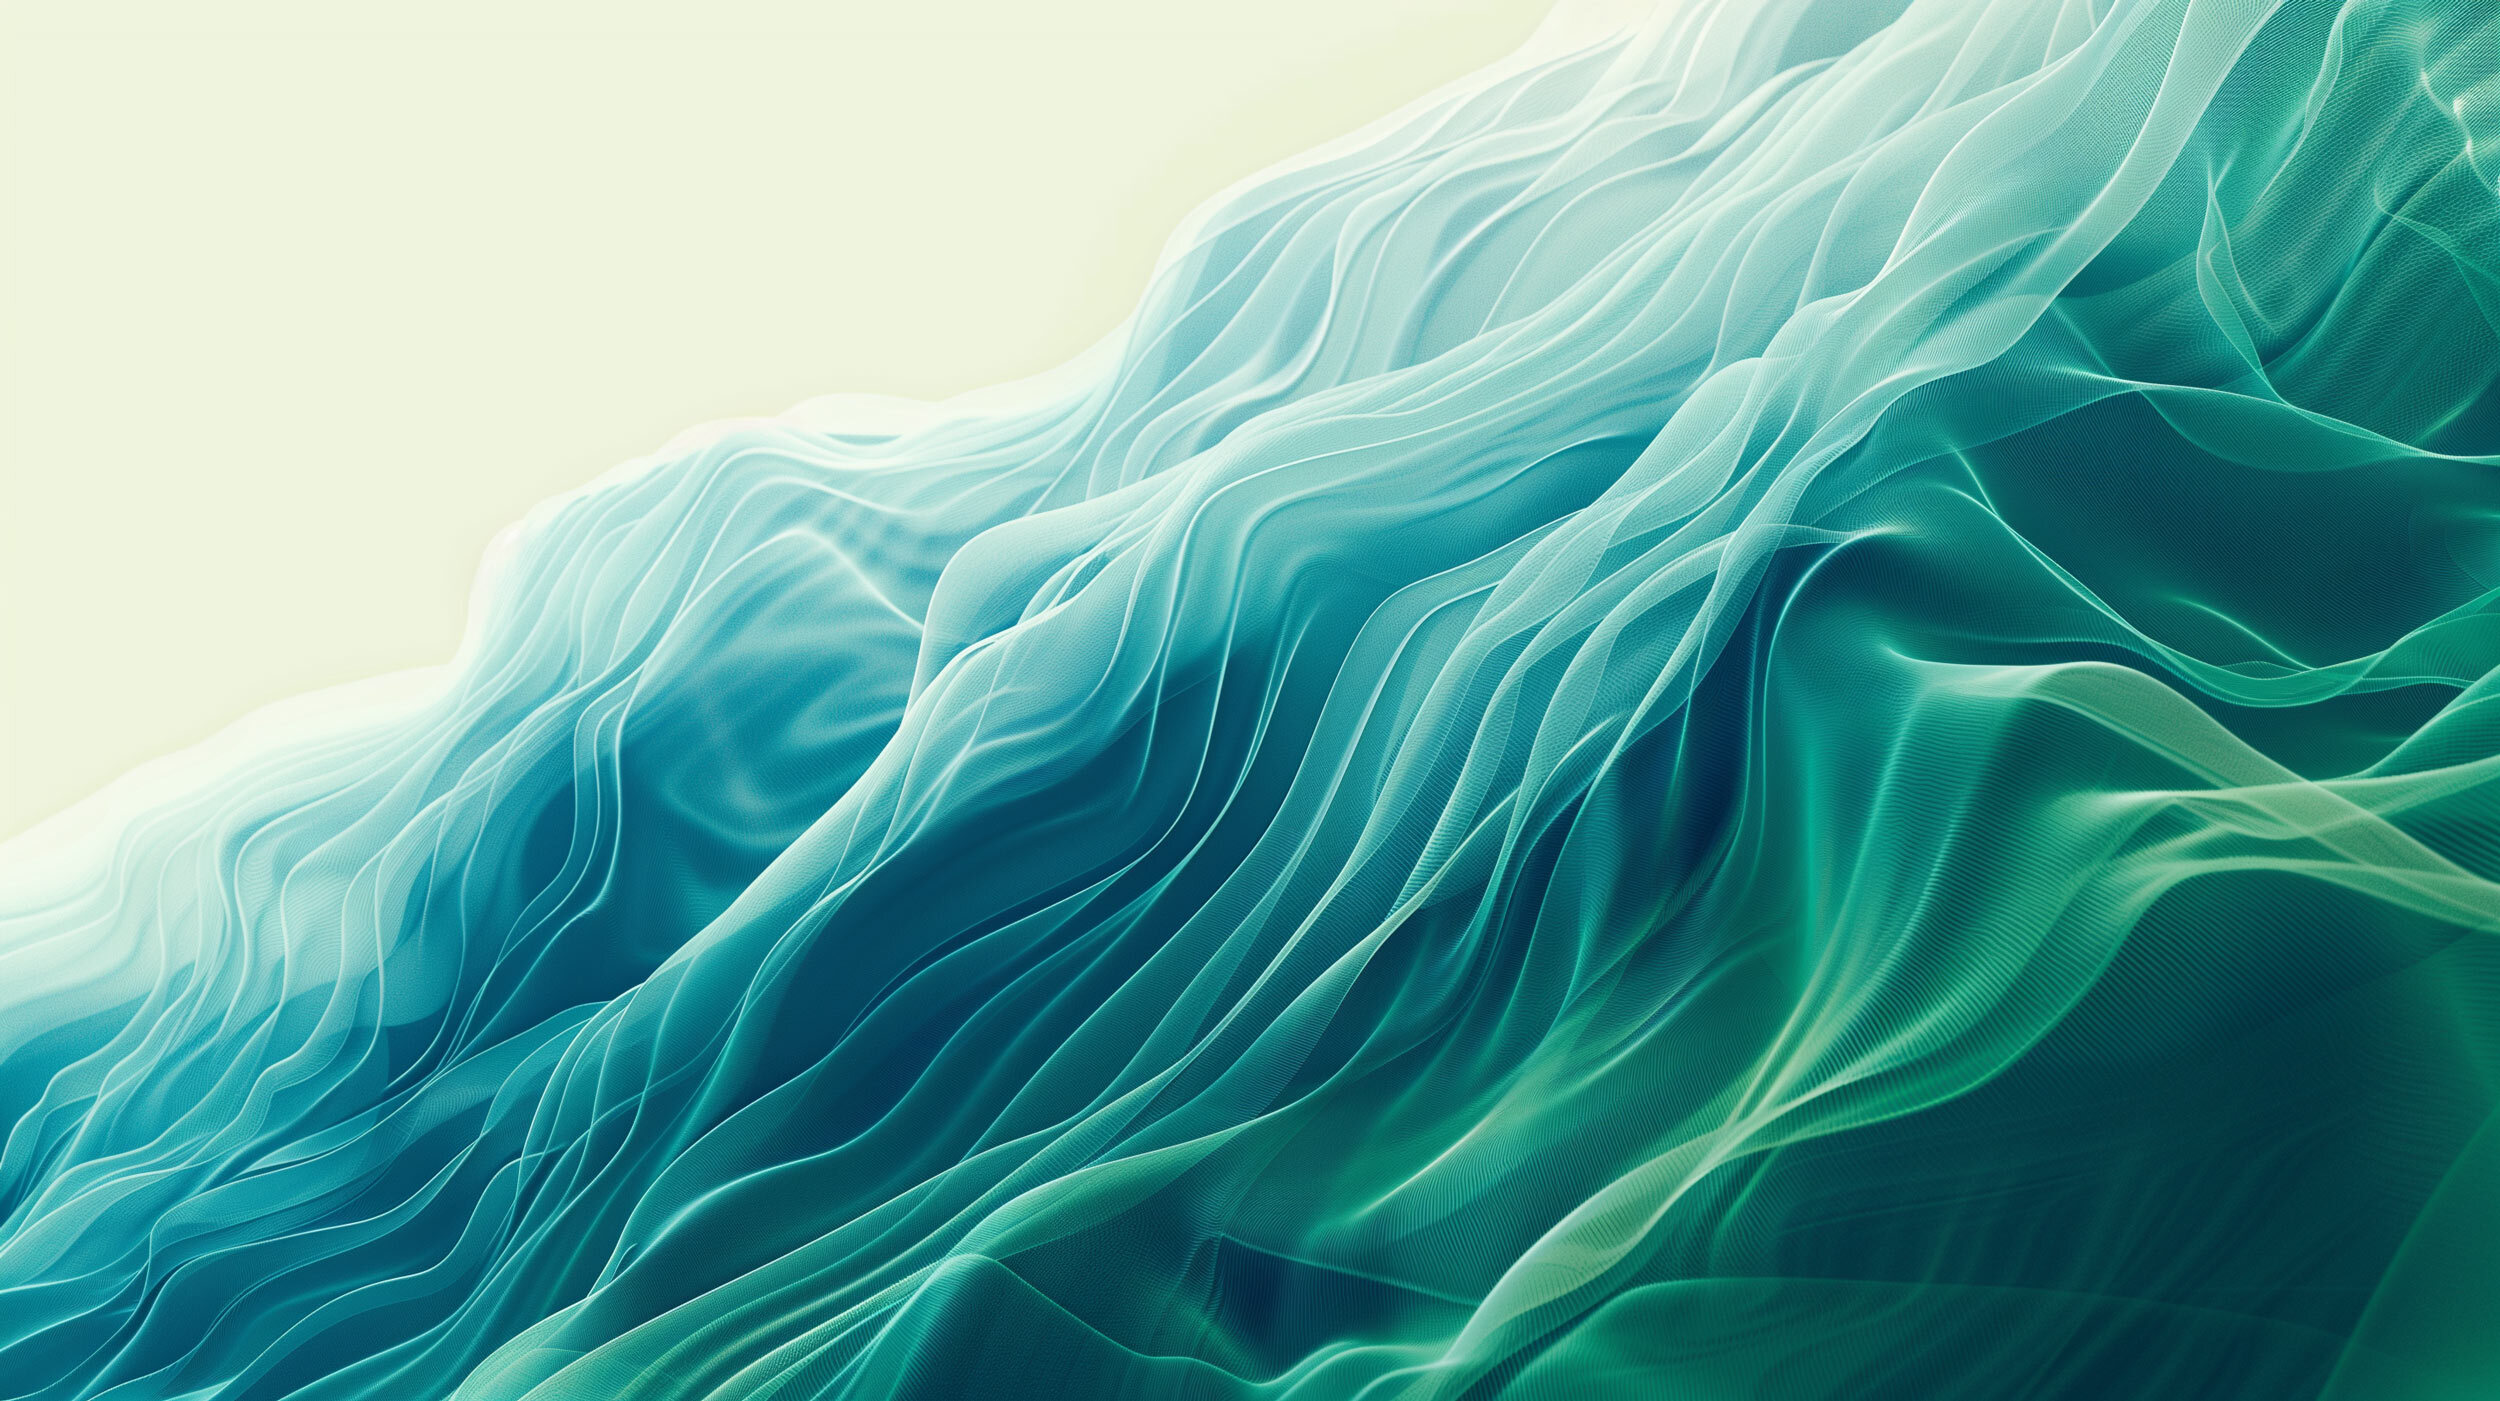 A series of fluid transparent teal and blue waves in the shape of regression data.